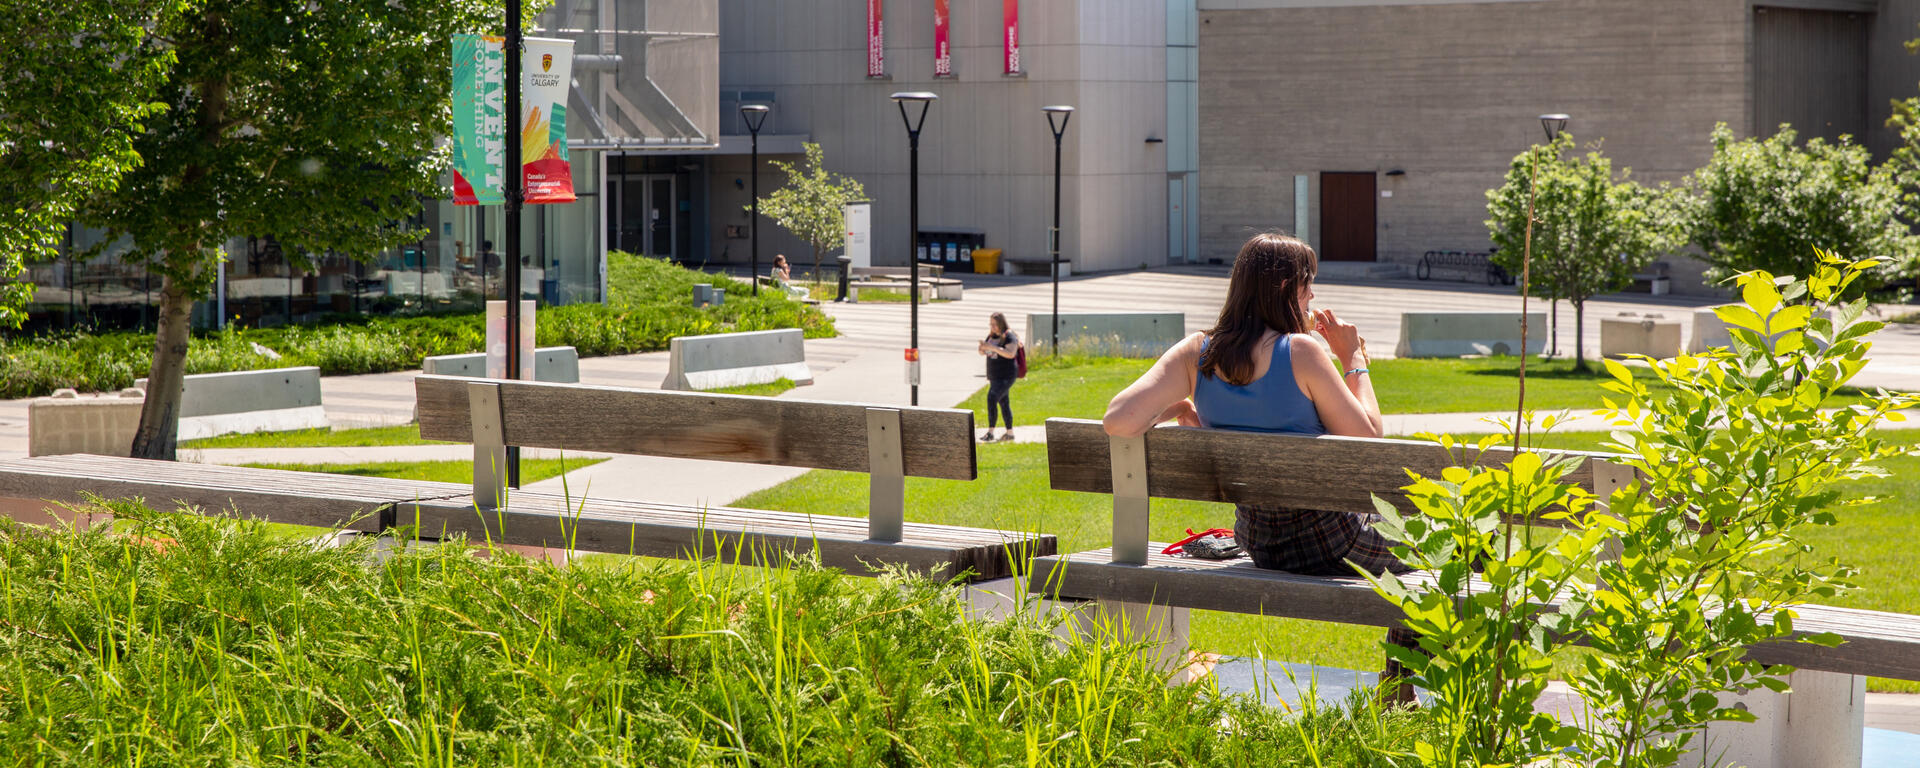 Students relax outside on campus in the summer